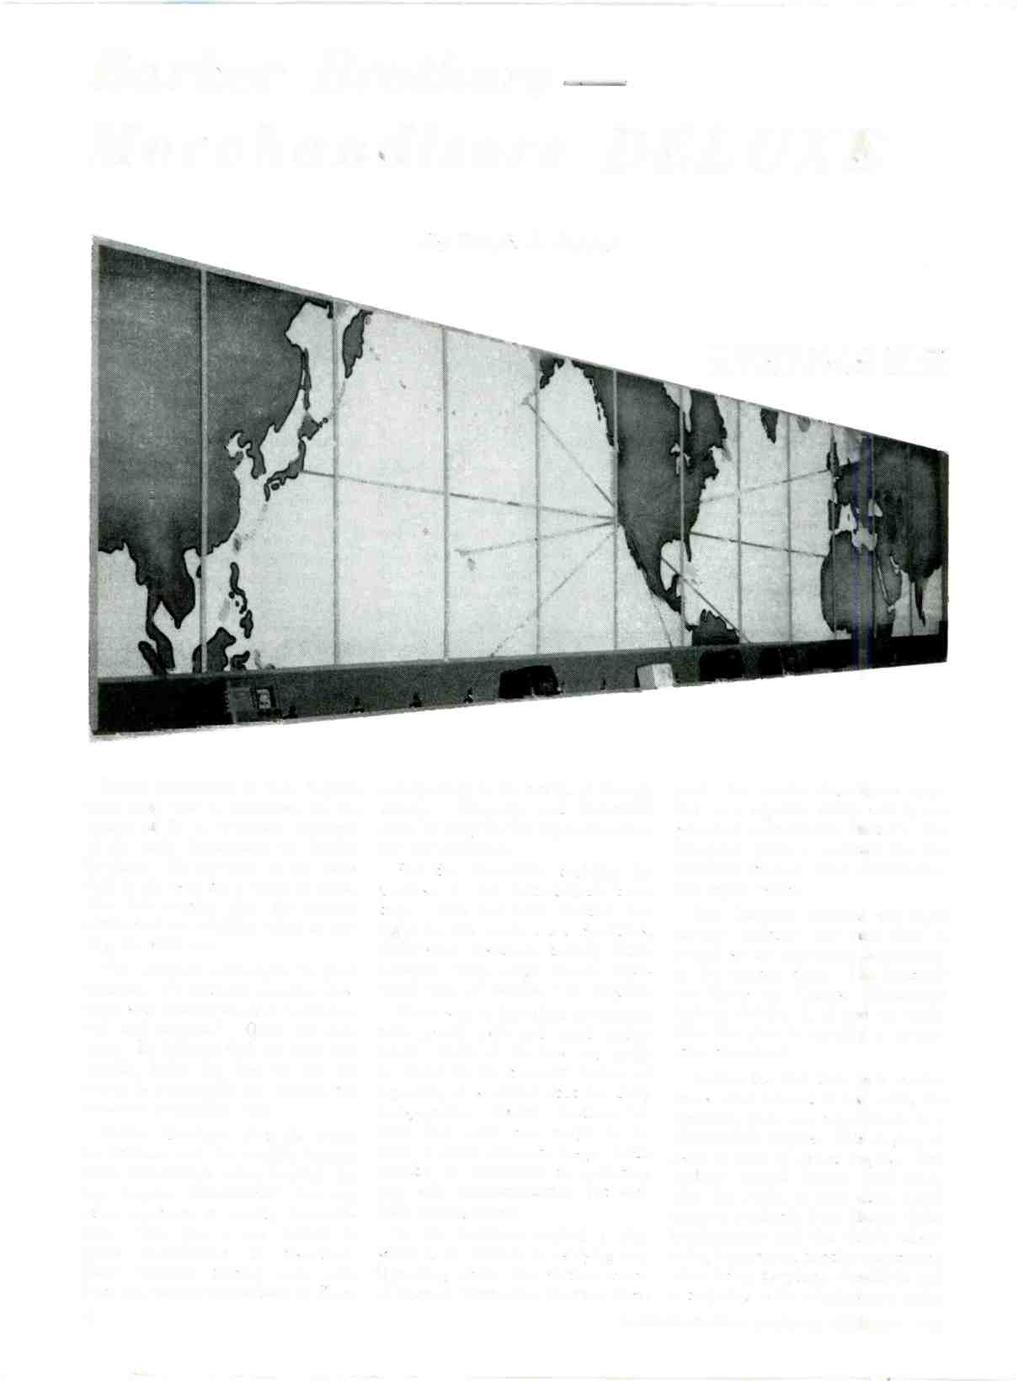 I Barber Brothers Merchandisers DELUXE By Ralph L. Power This illuminated map of.he world meat. - ores 45 feet in length. sed gives ample room to display all models of table radios.